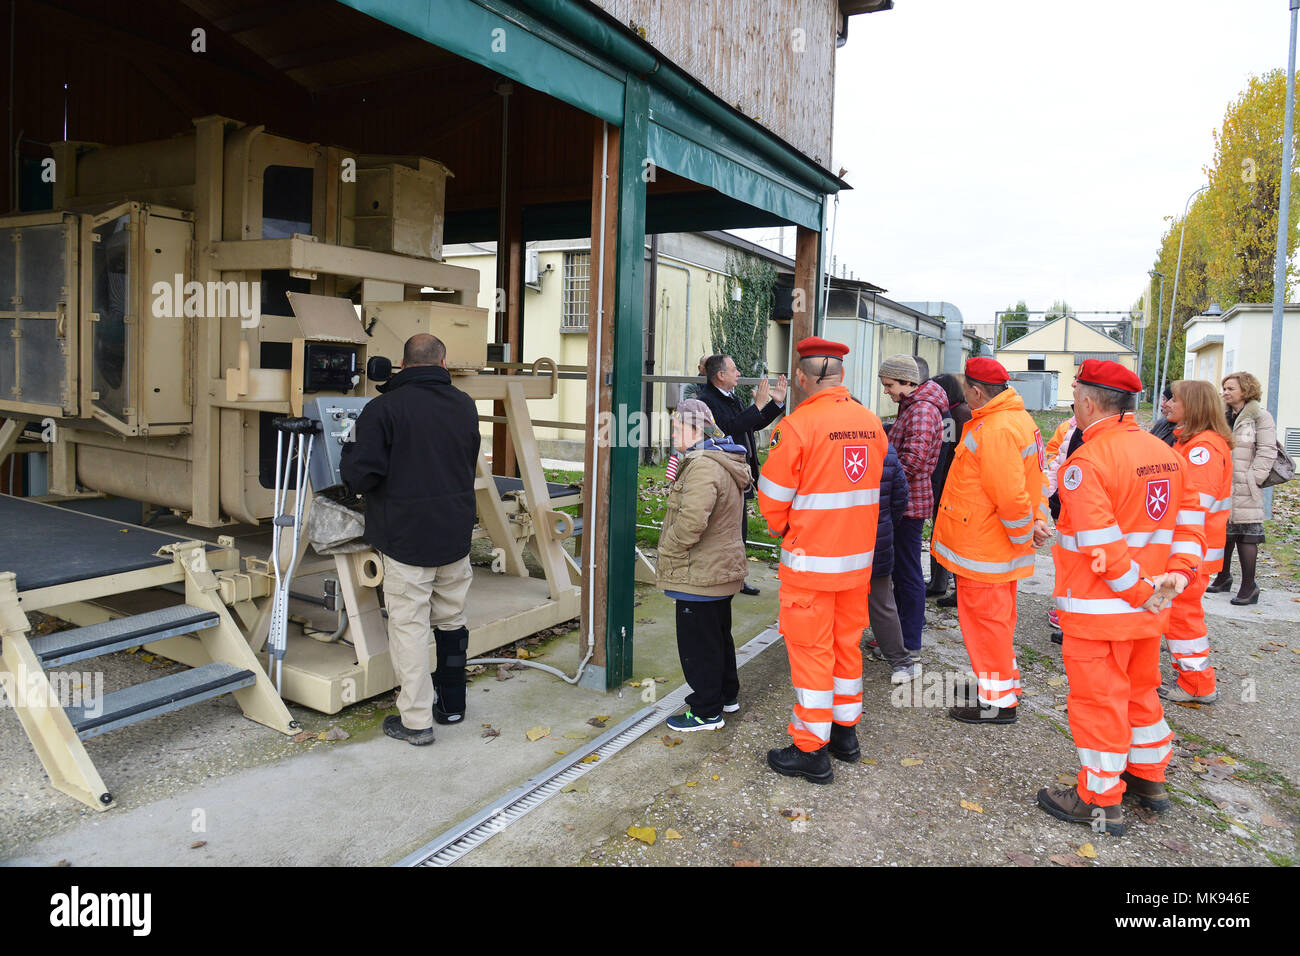 Ivano Trevisanutto, chief, Training Support Center Italy, shows the Mine Resistant Ambush Protected (MRAP), to a delegation from “Associazione Il Nuovo Ponte” and Sovereign Military Order, during a visit to Caserma Ederle Nov. 28, 2017. Associazione Il Nuovo Ponte is a social solidarity cooperative that since 1984 runs Social-Health Services for people with disabilities. (U.S. Army photo by Paolo Bovo) Stock Photo